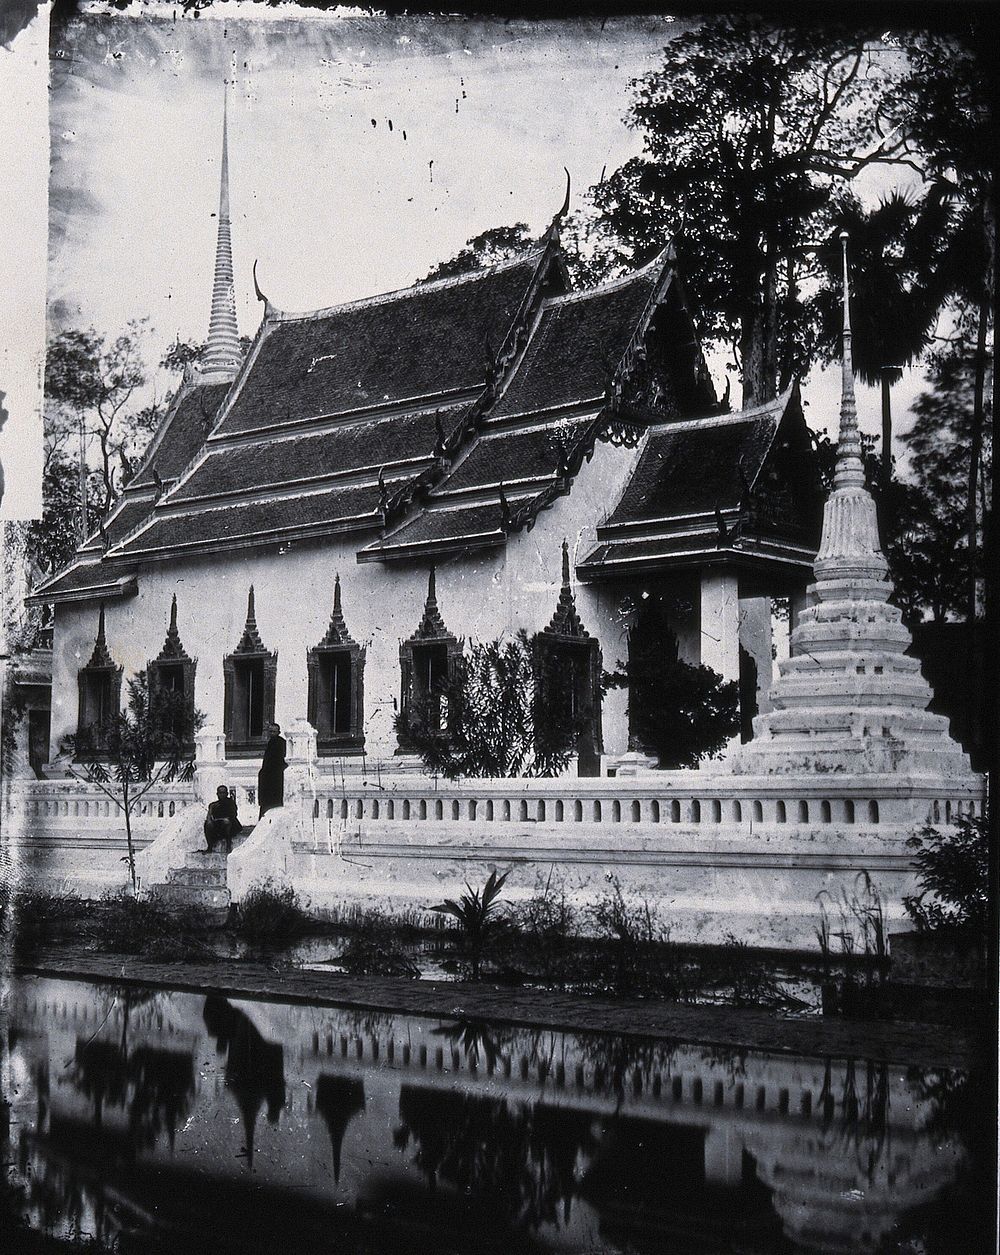 Chao Phraya river, Siam [Thailand]. Photograph, 1981, from a negative by John Thomson, 1865.